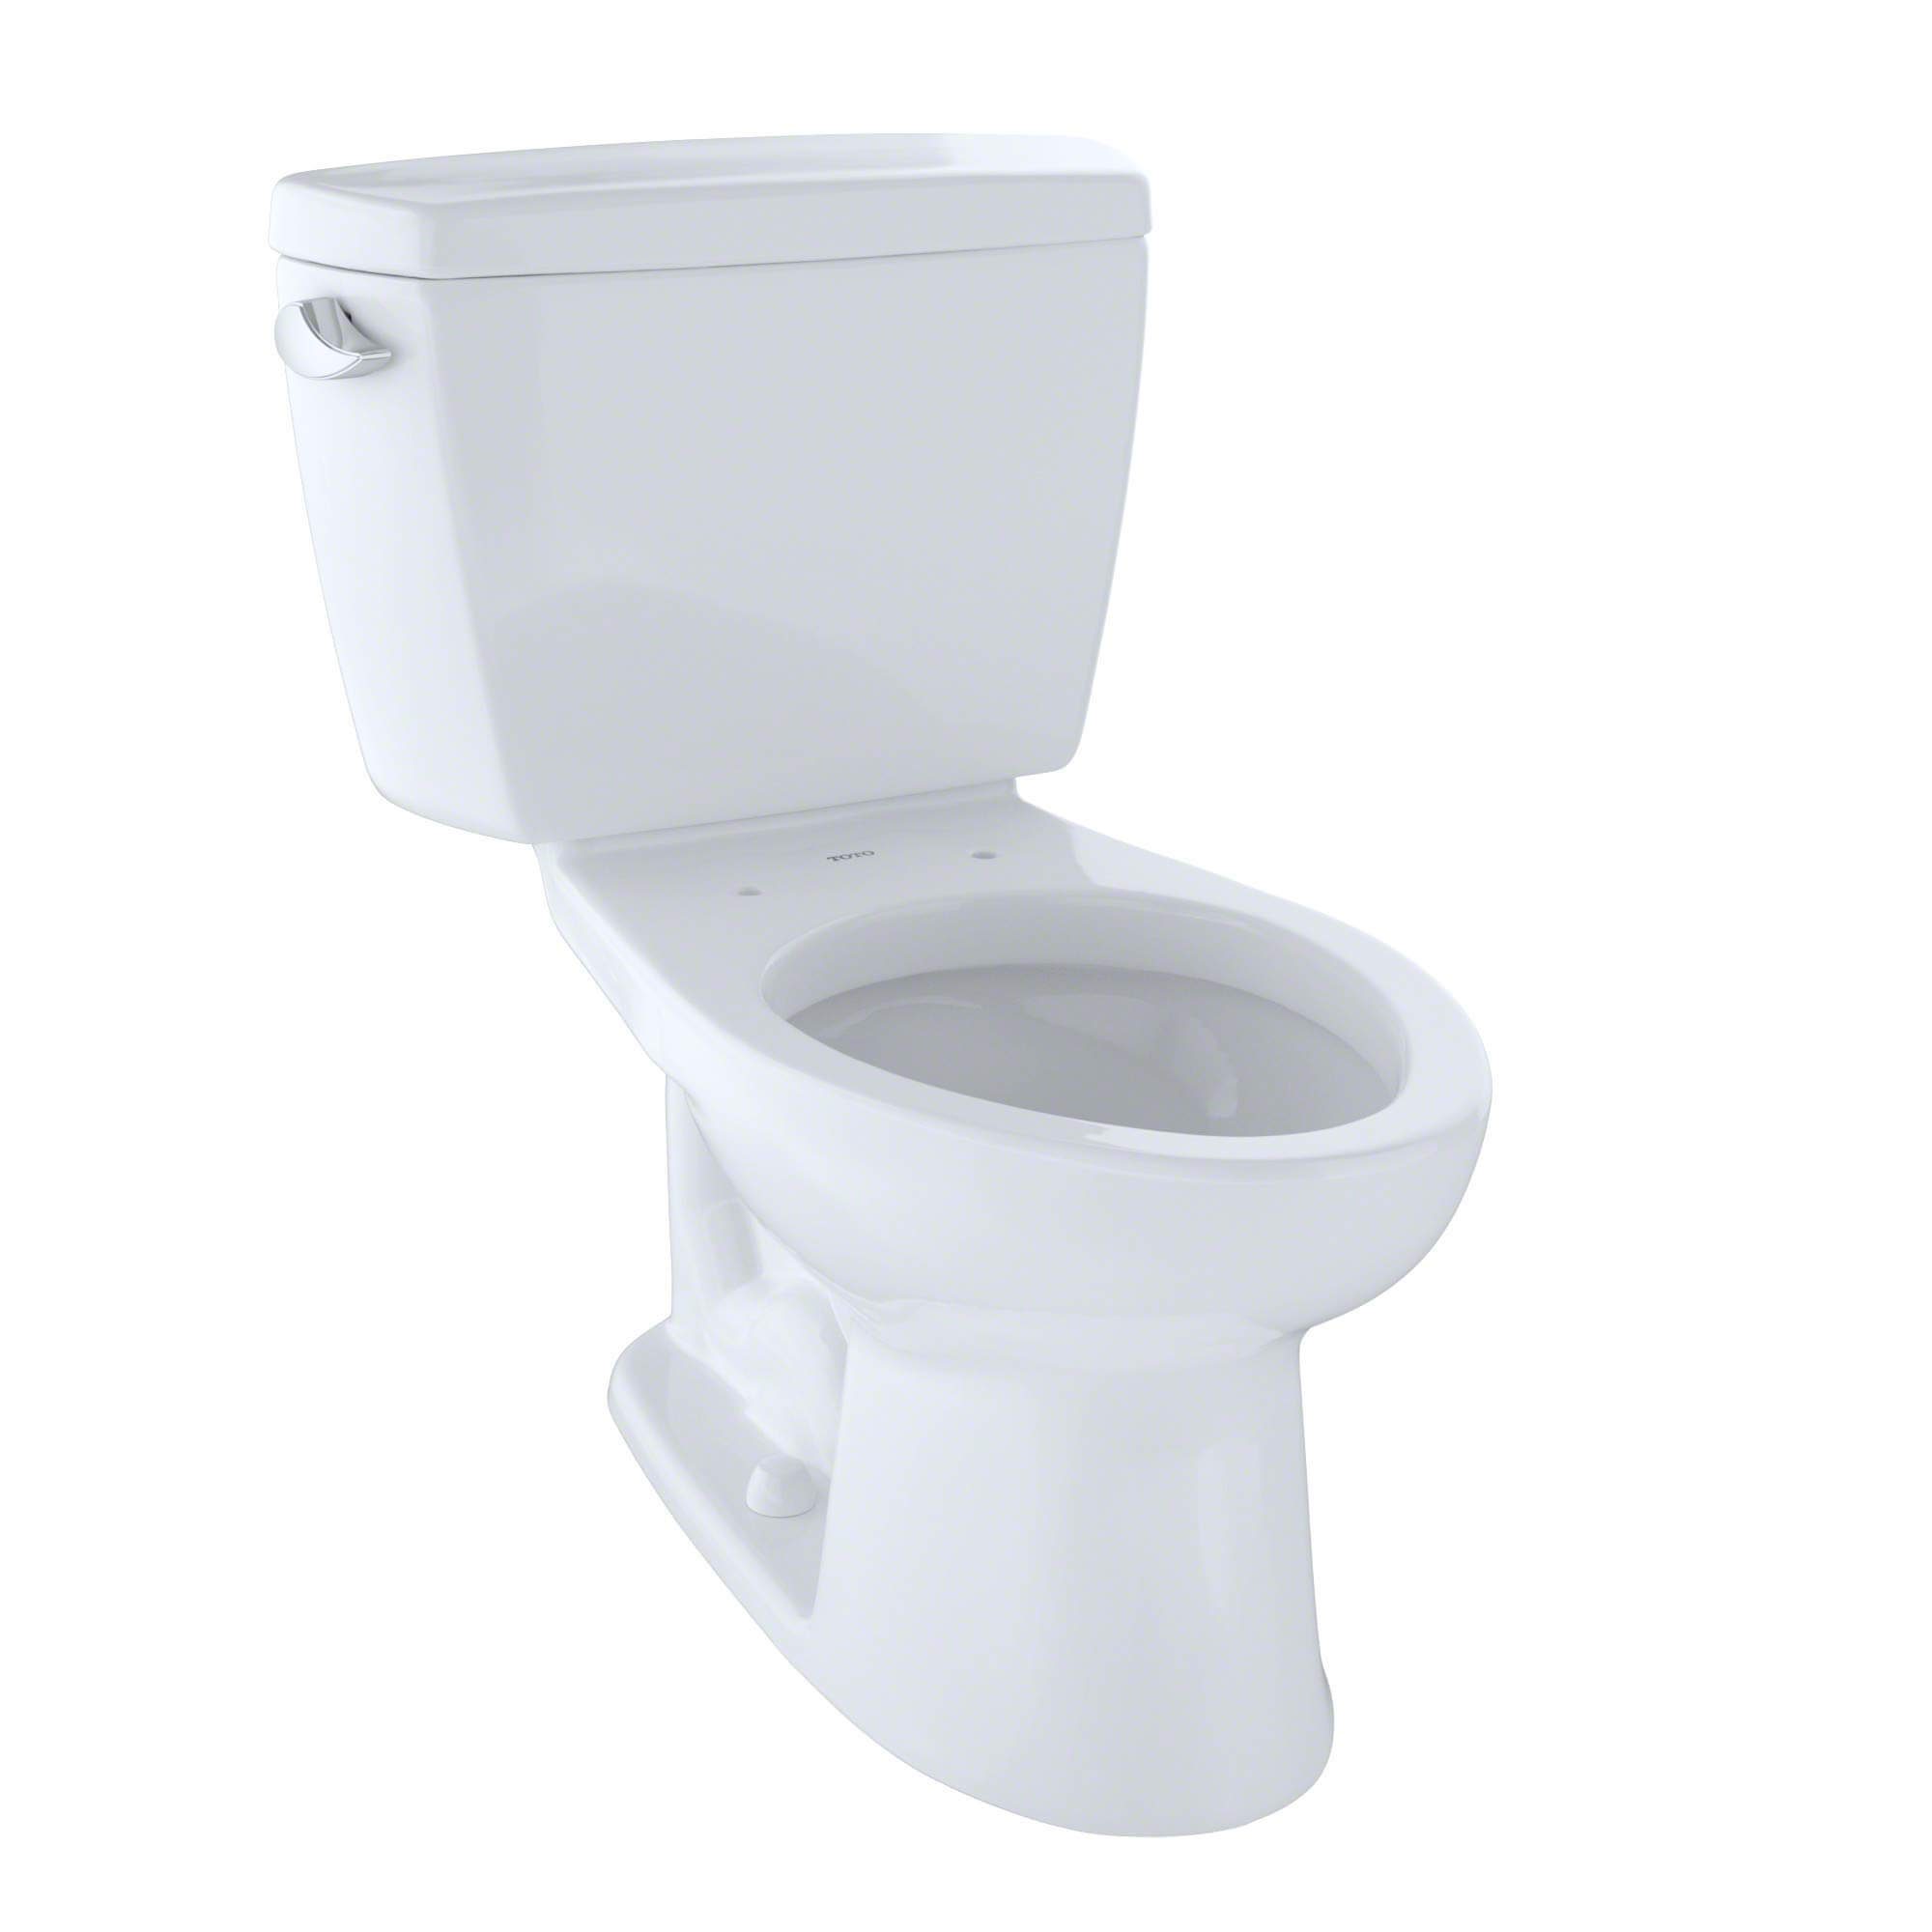 TOTO CST744SG#01 Drake 2-Piece best rated Toilet with Elongated Bowl and Sanagloss,1.6 GPF, Glazed Cotton White,